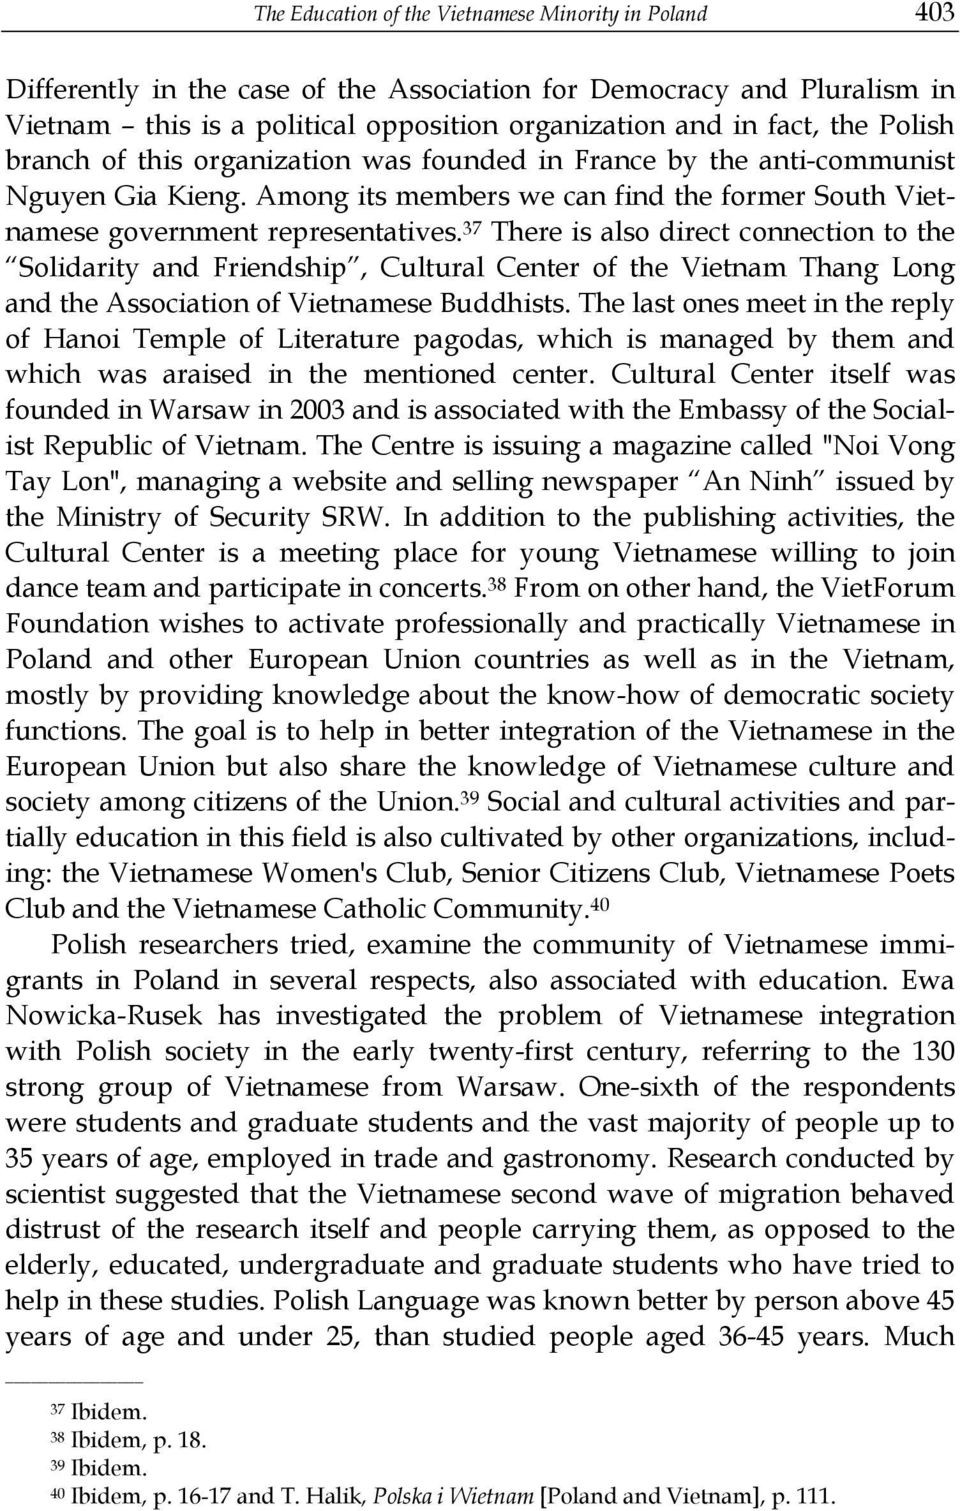 37 There is also direct connection to the Solidarity and Friendship, Cultural Center of the Vietnam Thang Long and the Association of Vietnamese Buddhists.